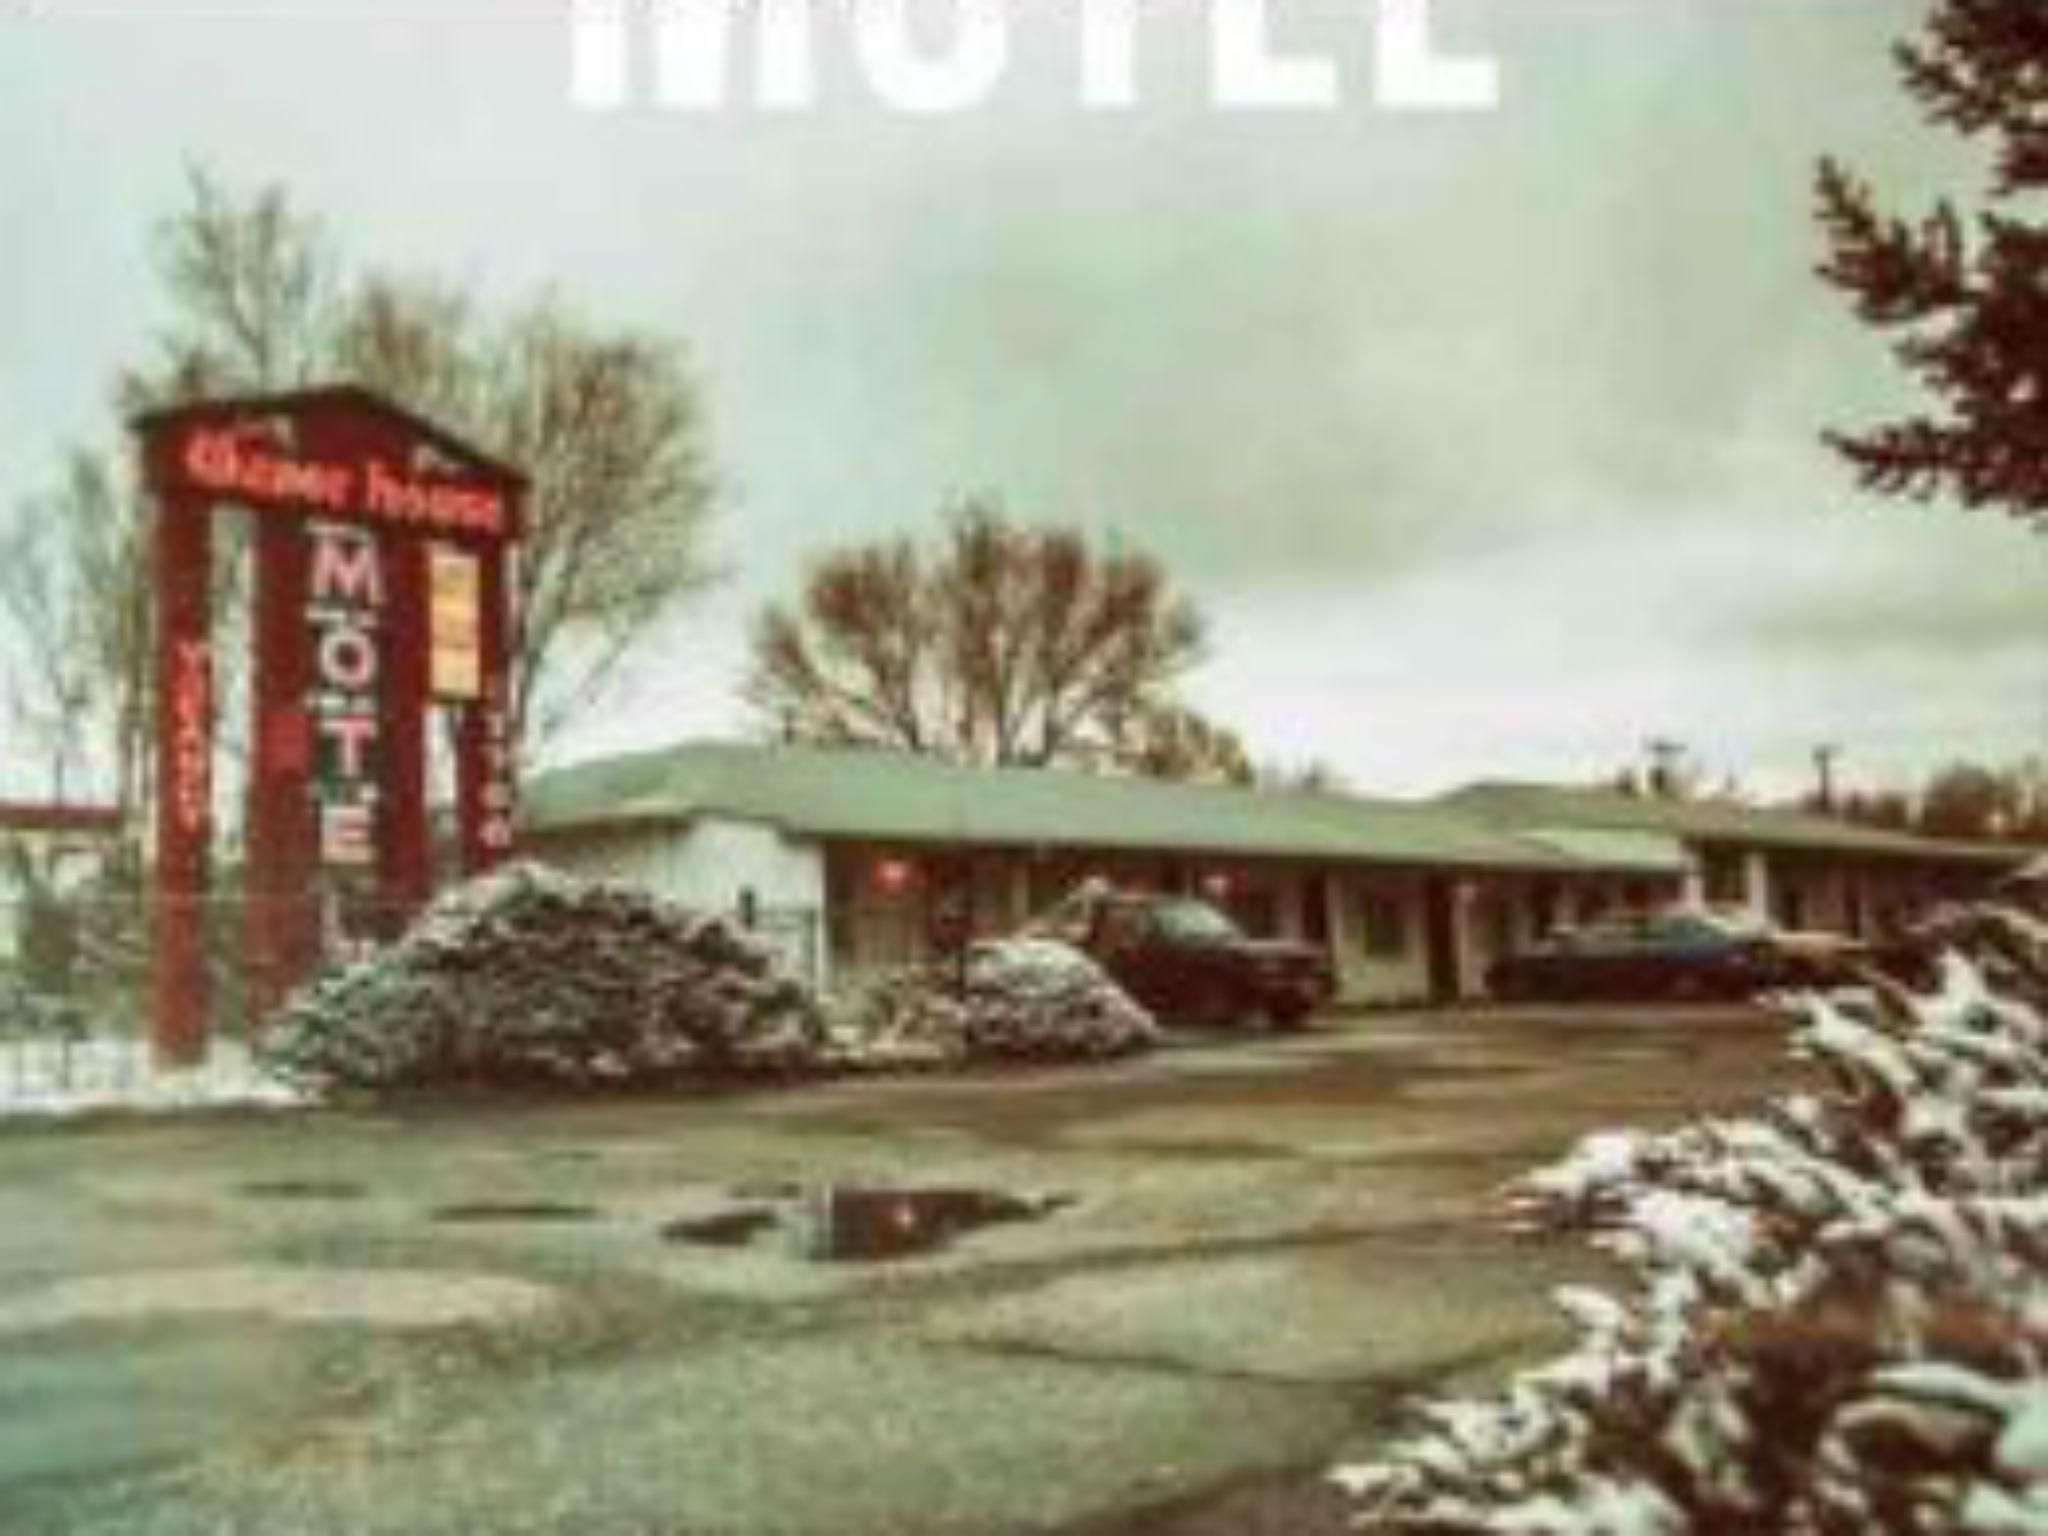 The Voyeurs Motel, book review Spare yourself the trouble of reading this seedy little book The Independent The Independent image picture